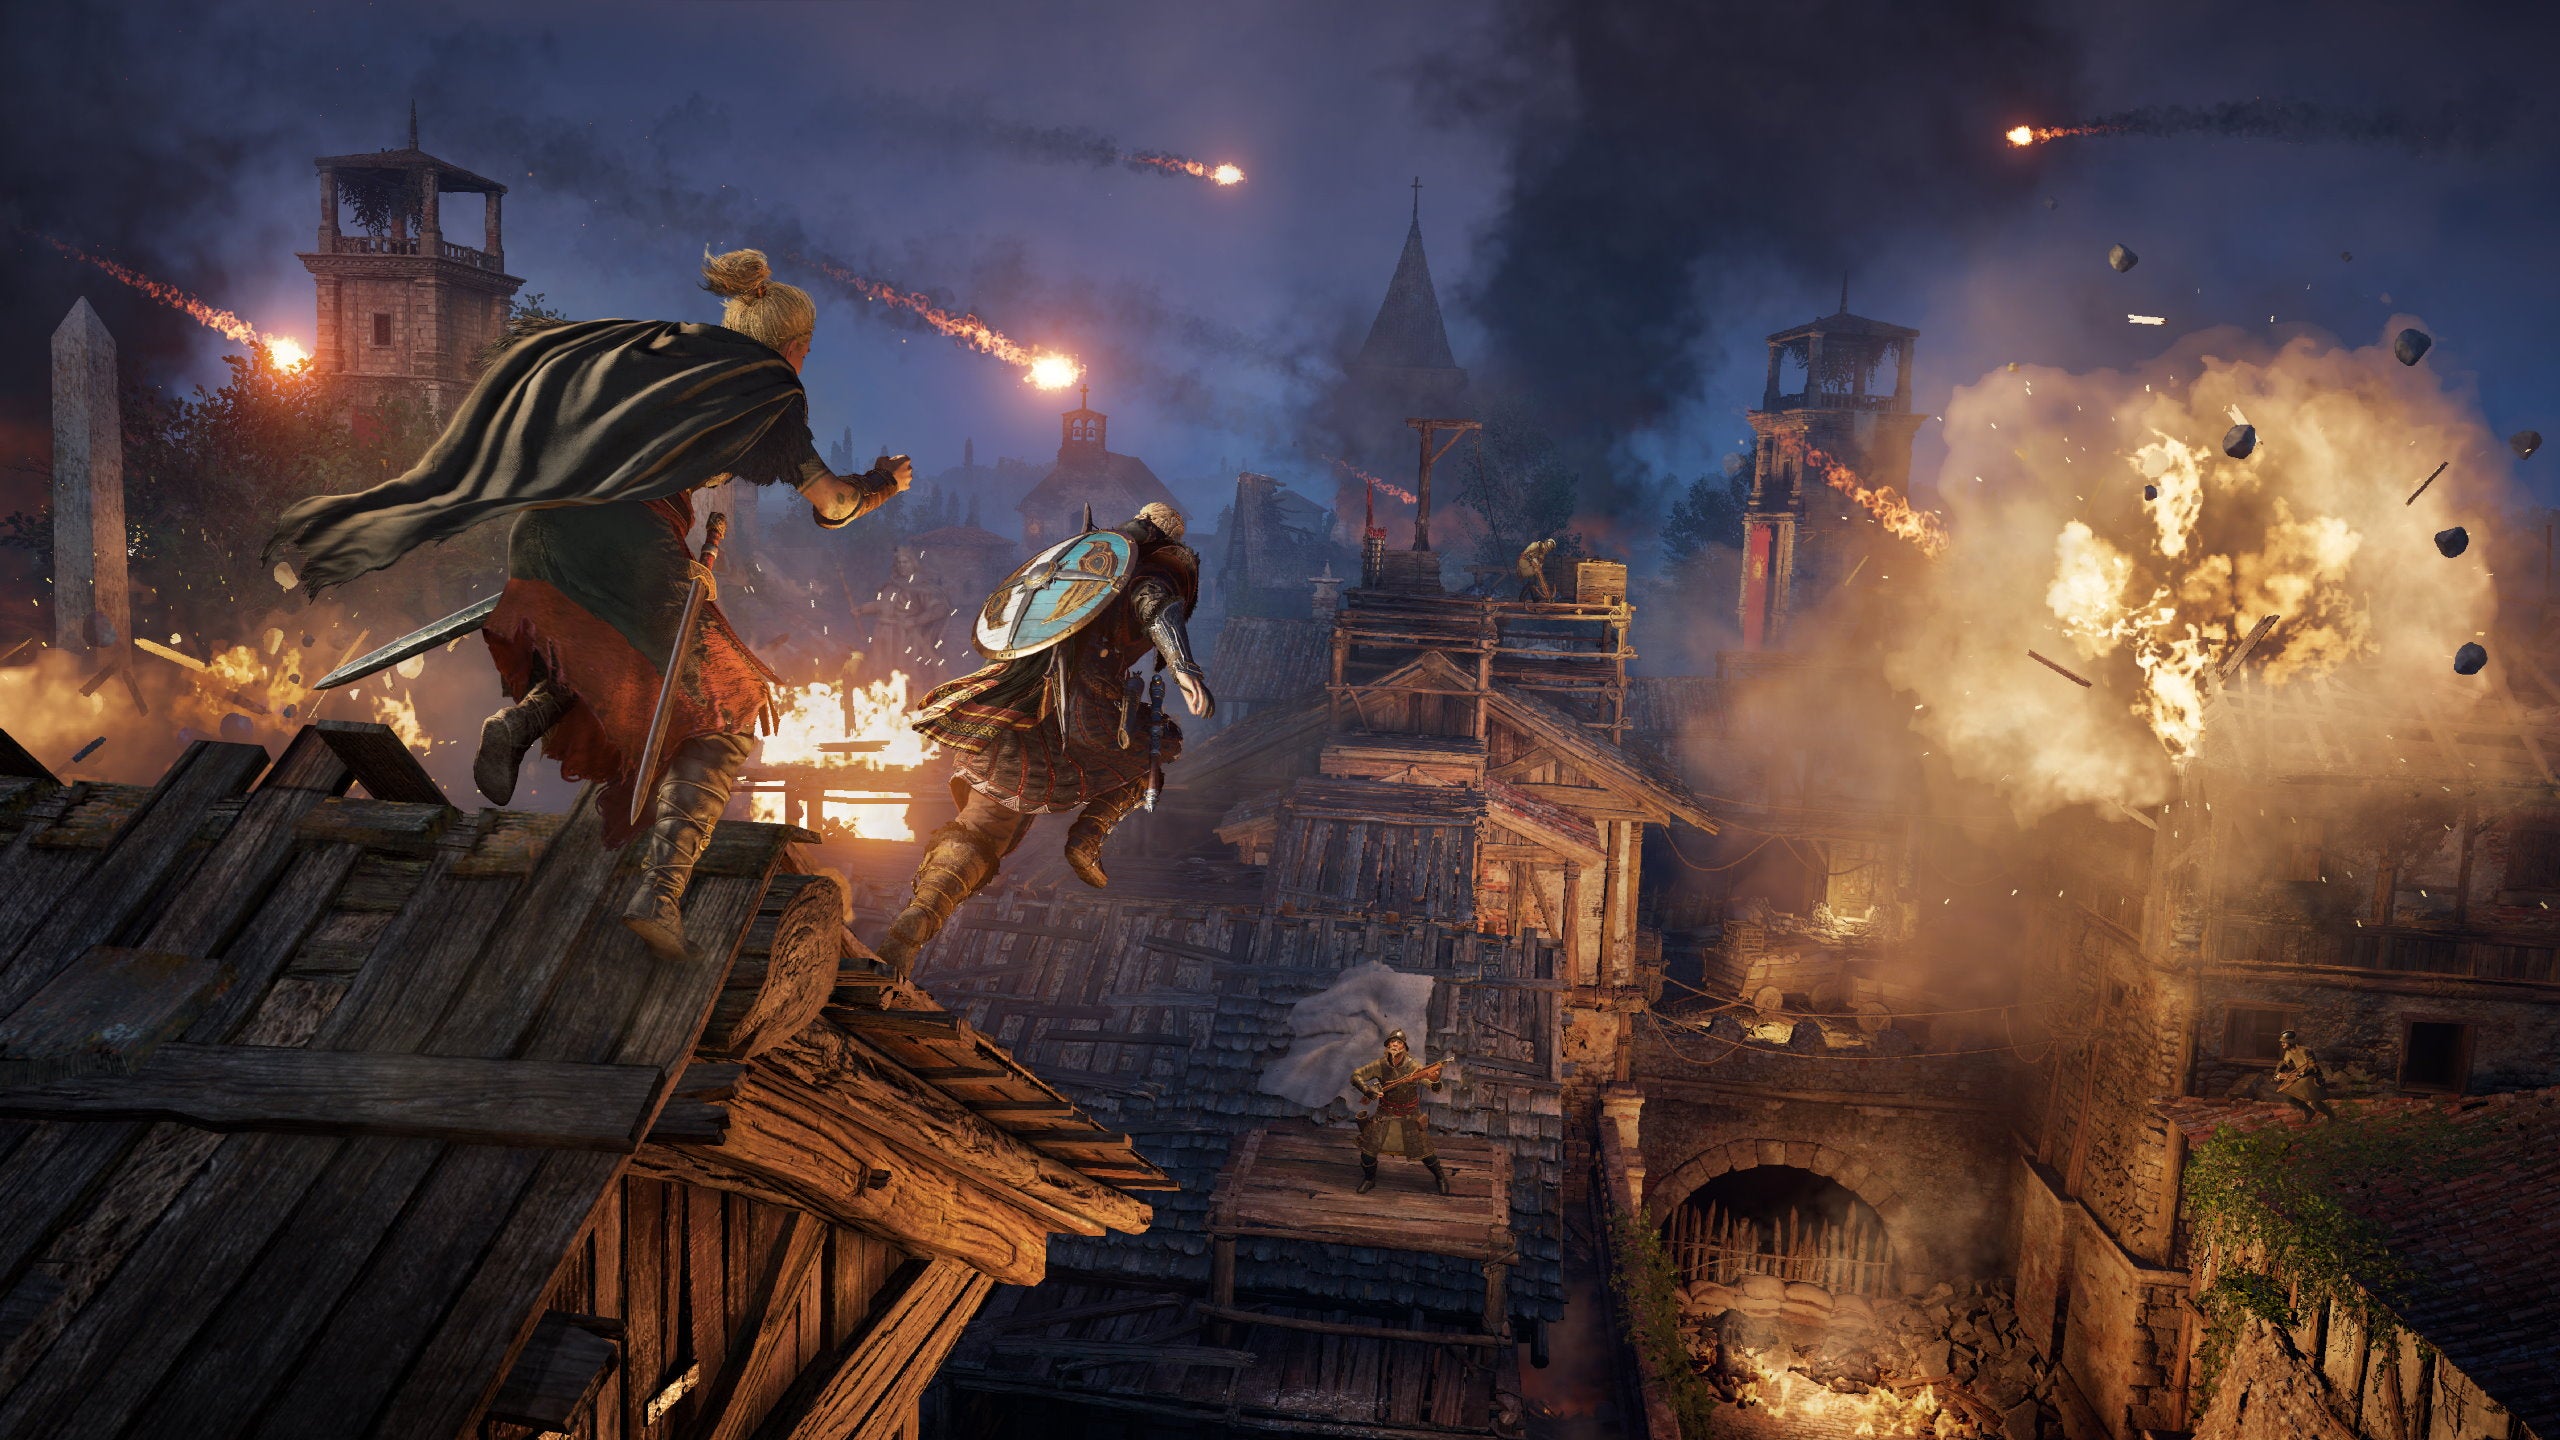 Two Vikings leap across Paris rooftops as they come under attack in Assassin's Creed Valhalla's Siege of Paris expansion